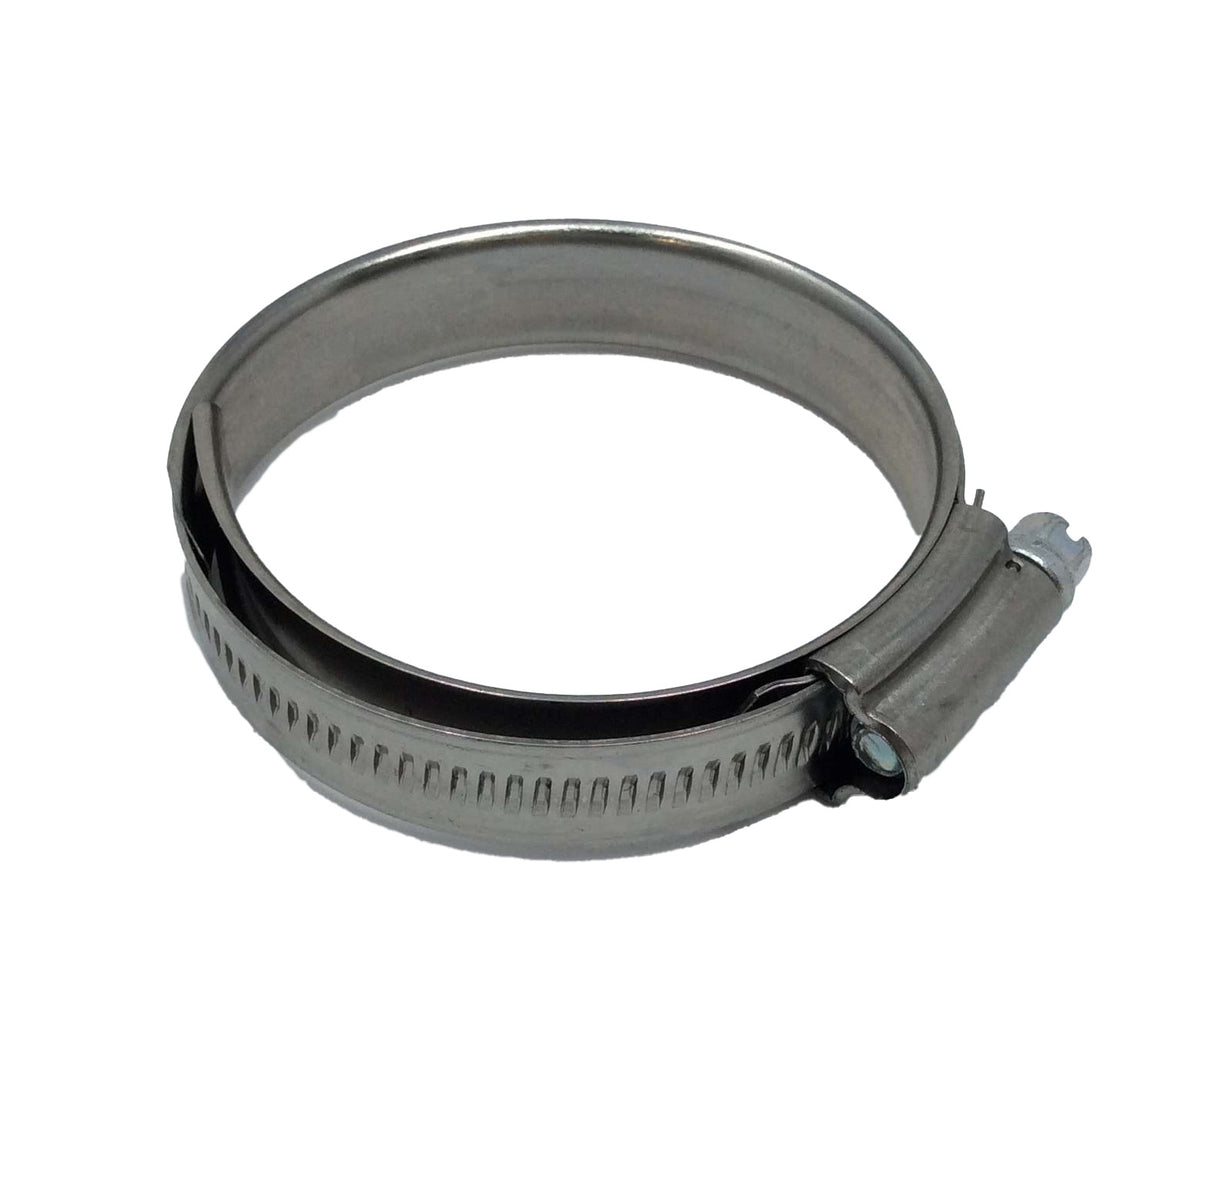 ABA  ­-­ 0813 4003 058 ­-­ HOSE CLAMP - SS  50-65  SIZE 32